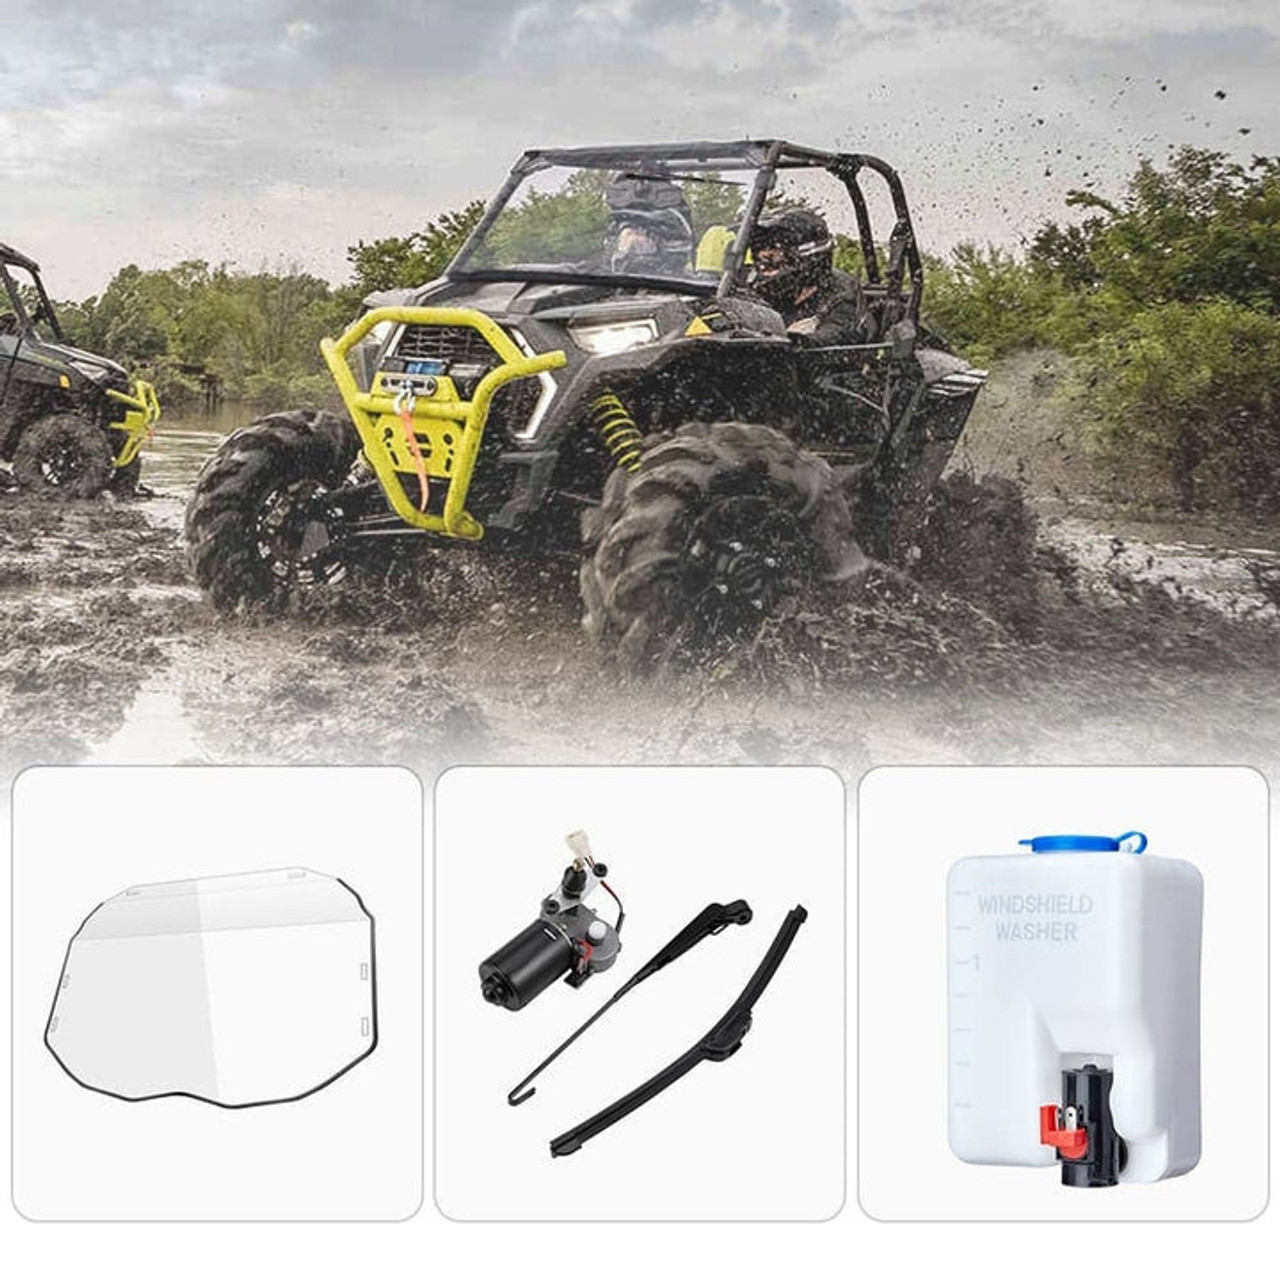 Enhance Off-Road Visibility with Kemimoto Hand Operated Windshield Wiper  Kit for Polaris Ranger